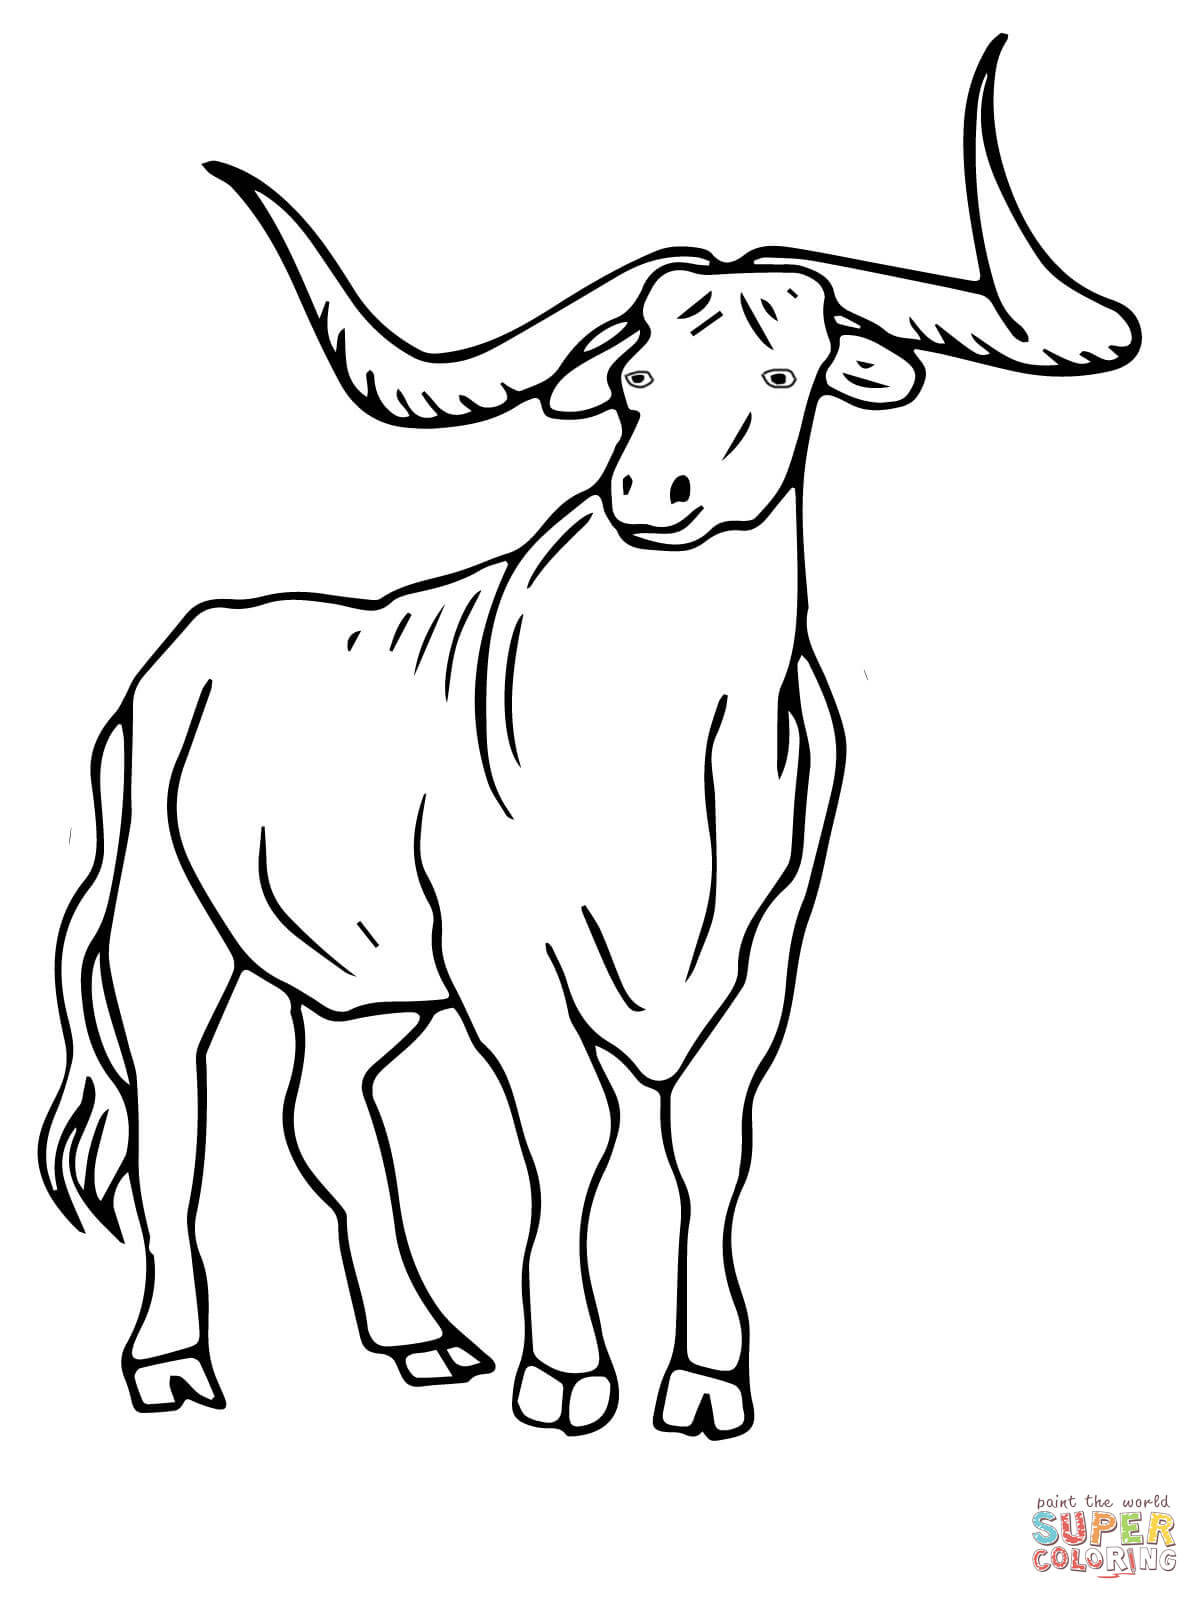 Texas Longhorn coloring page | Free Printable Coloring Pages